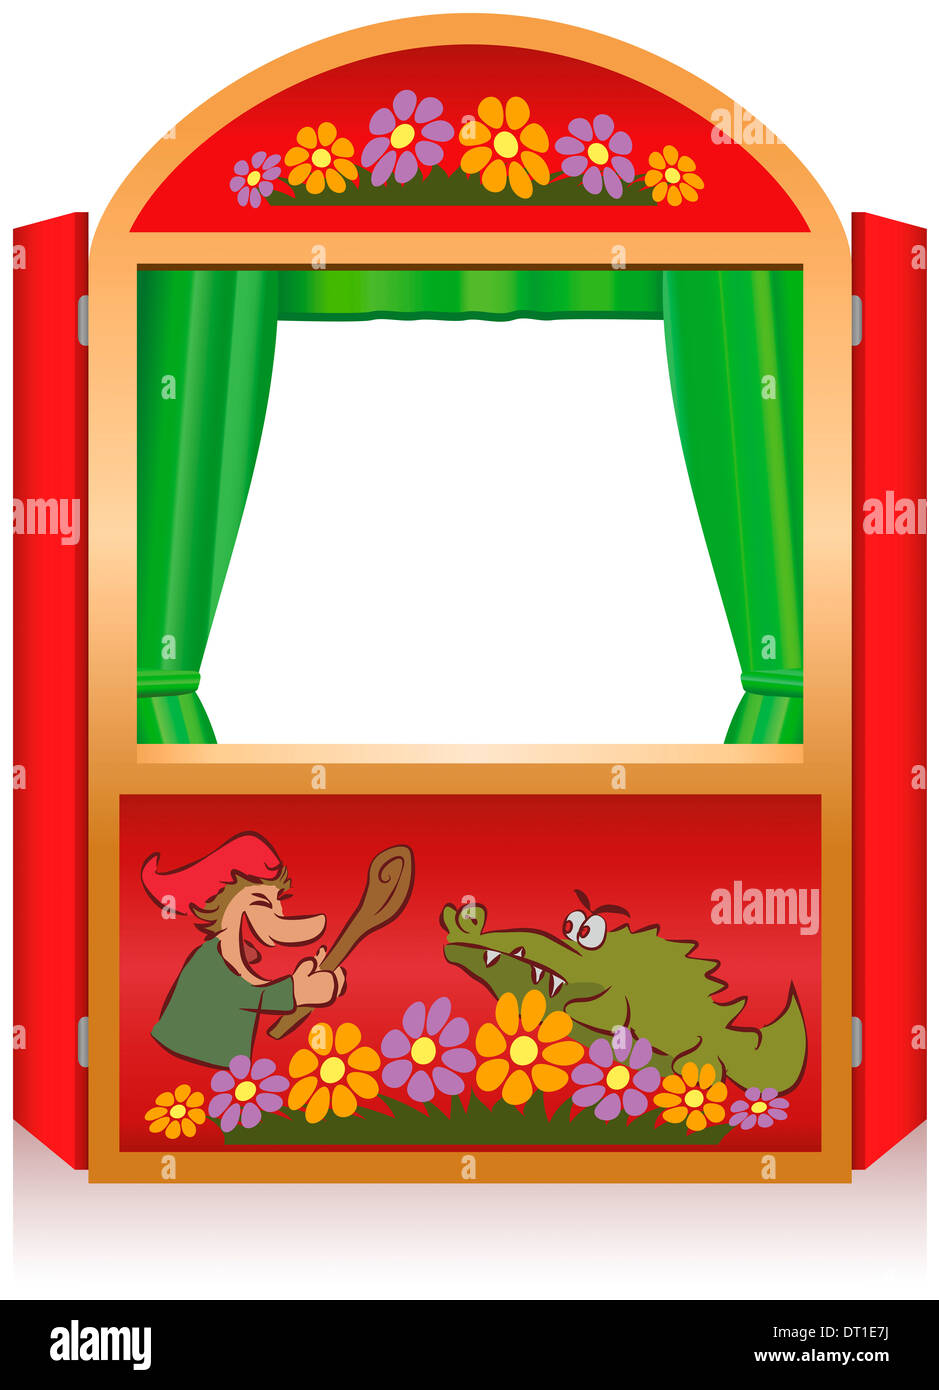 Punch and Judy, a traditional, popular puppet show. Red booth for the puppeteer. Stock Photo